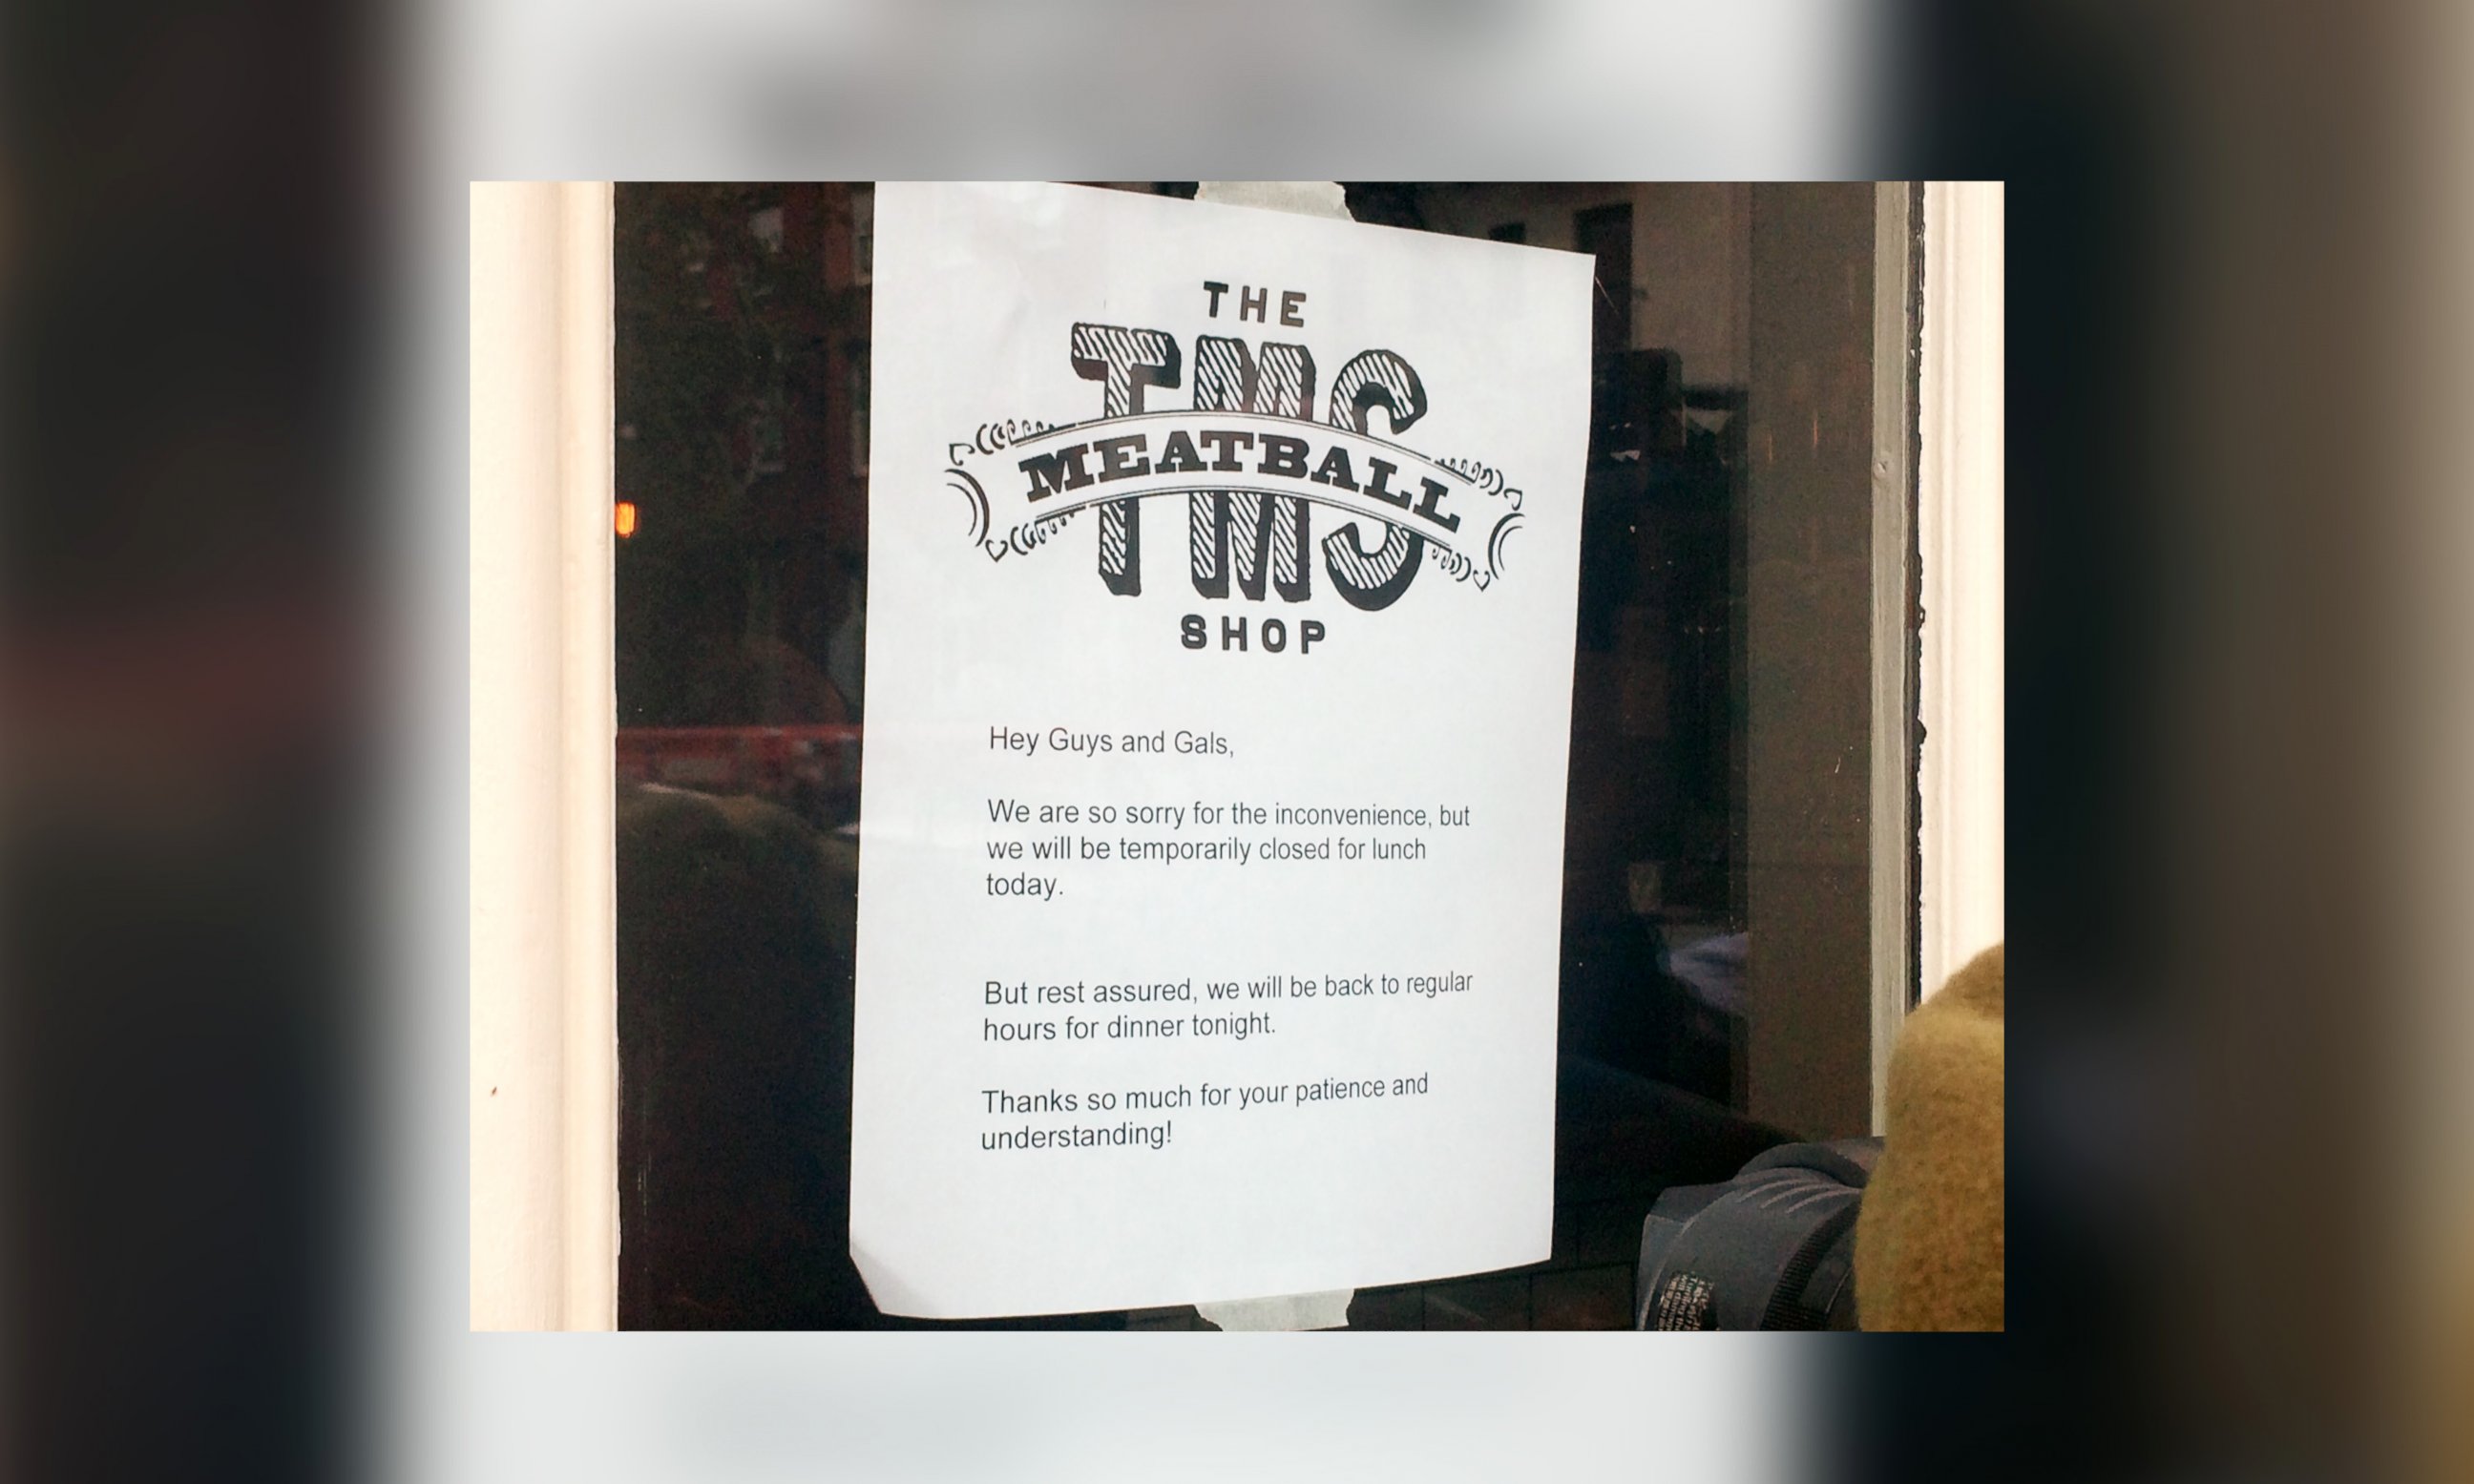 PHOTO: A sign on the front door of The Meatball Shop on Greenwich Avenue in the Manhattan borough of New York City says that the shop is closed for lunch but will reopen for dinner on Oct. 24, 2014.